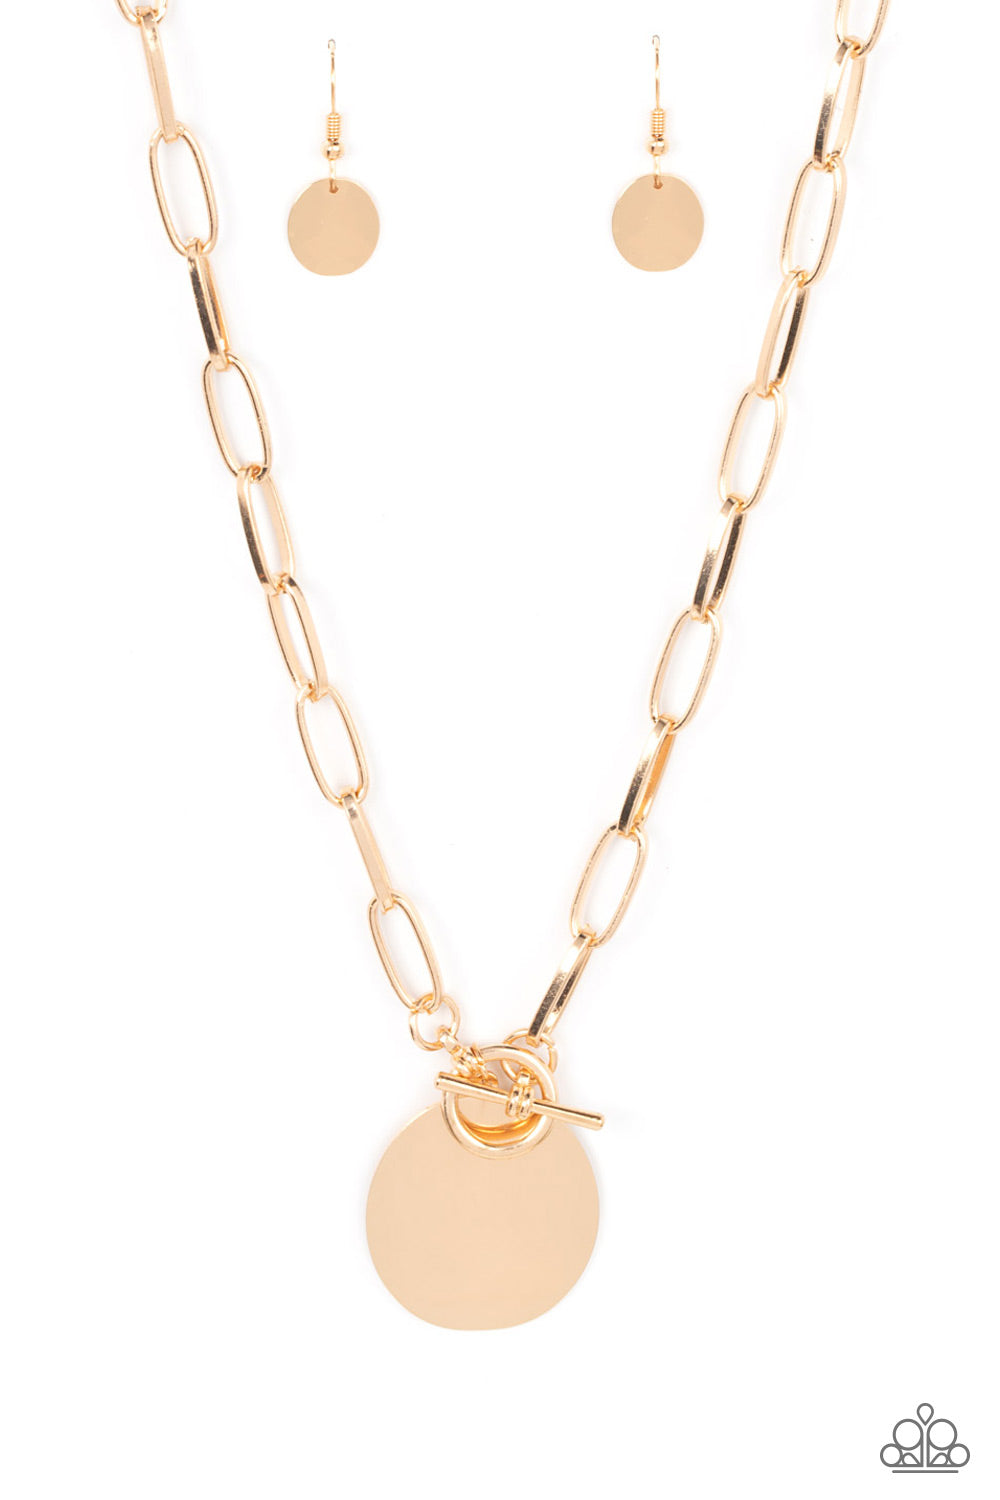 Tag Out - Gold Necklace